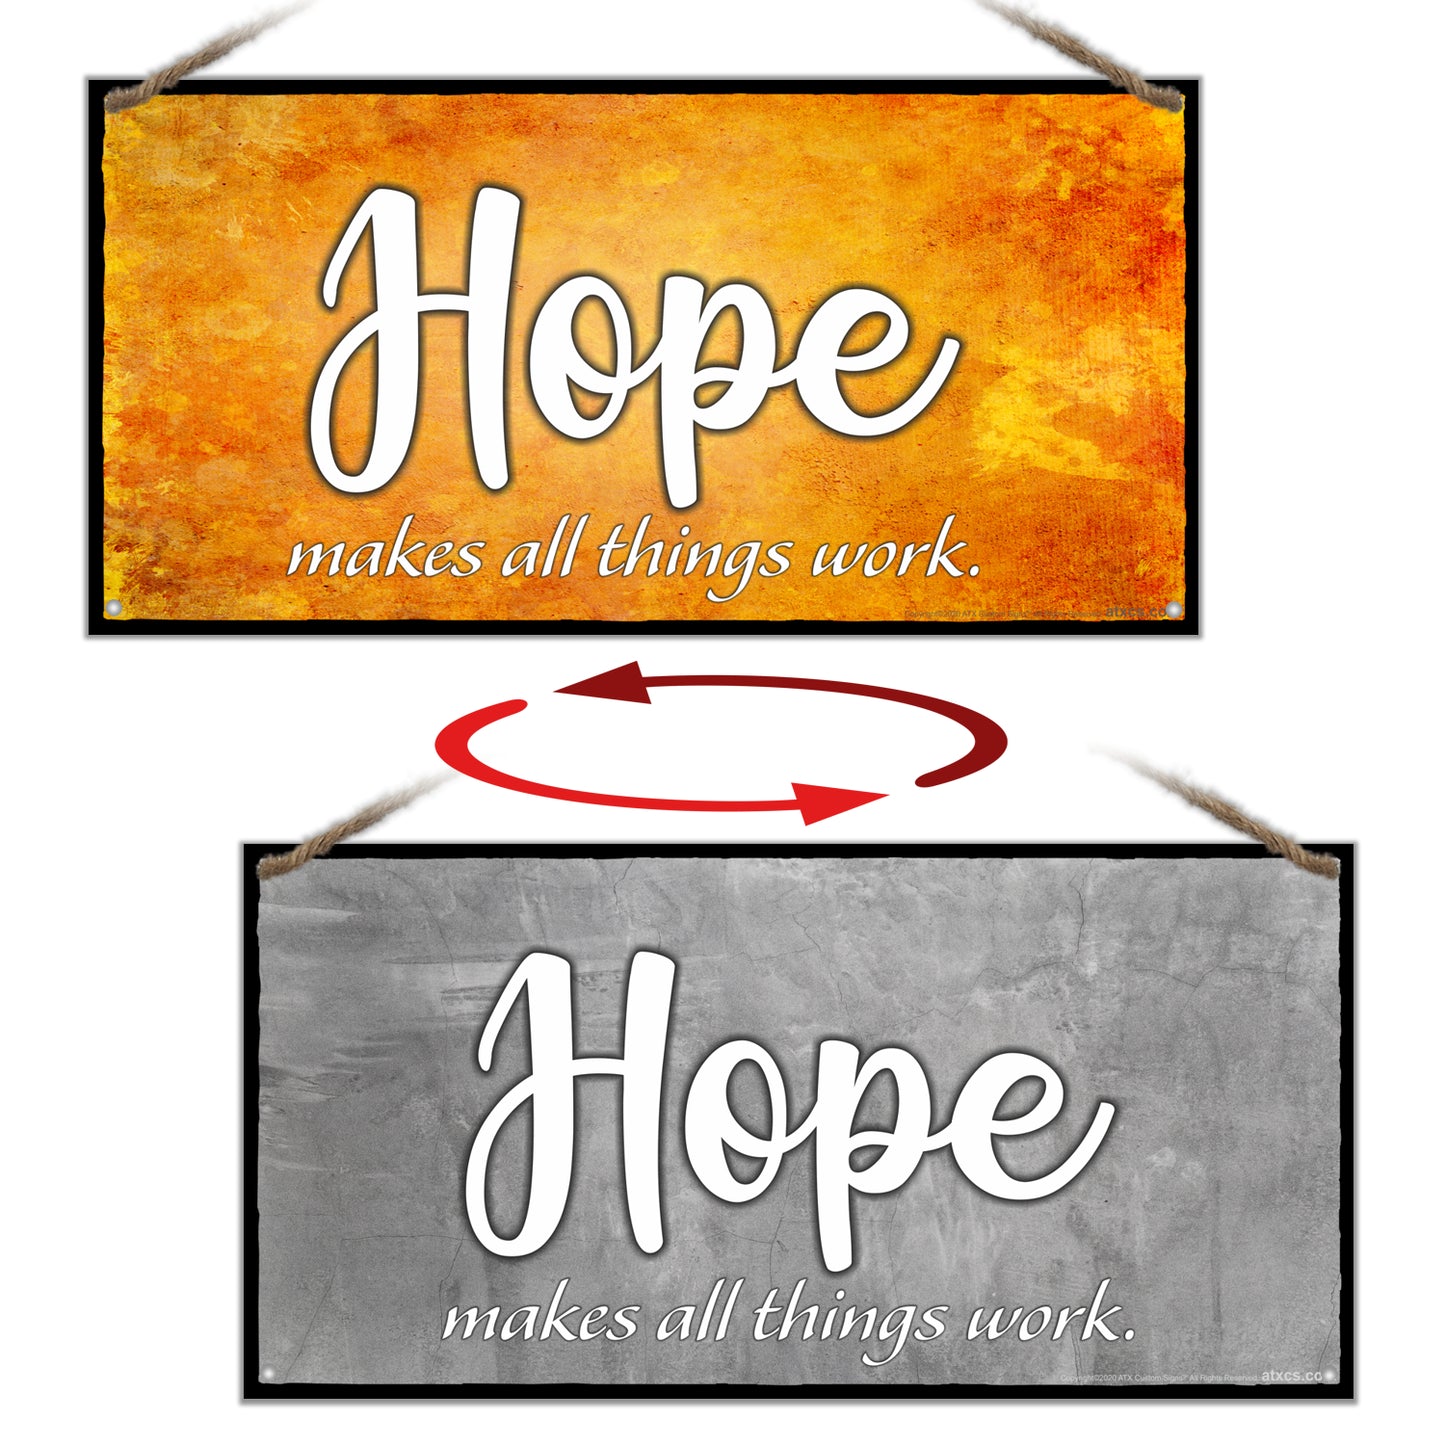 ATX CUSTOM SIGNS - Home Decor Signs. Faith, makes all things possible. Love, makes all things easy. Hope, makes all things work. Family, makes life worth living. Set of 4 Double Sided Color and Greys